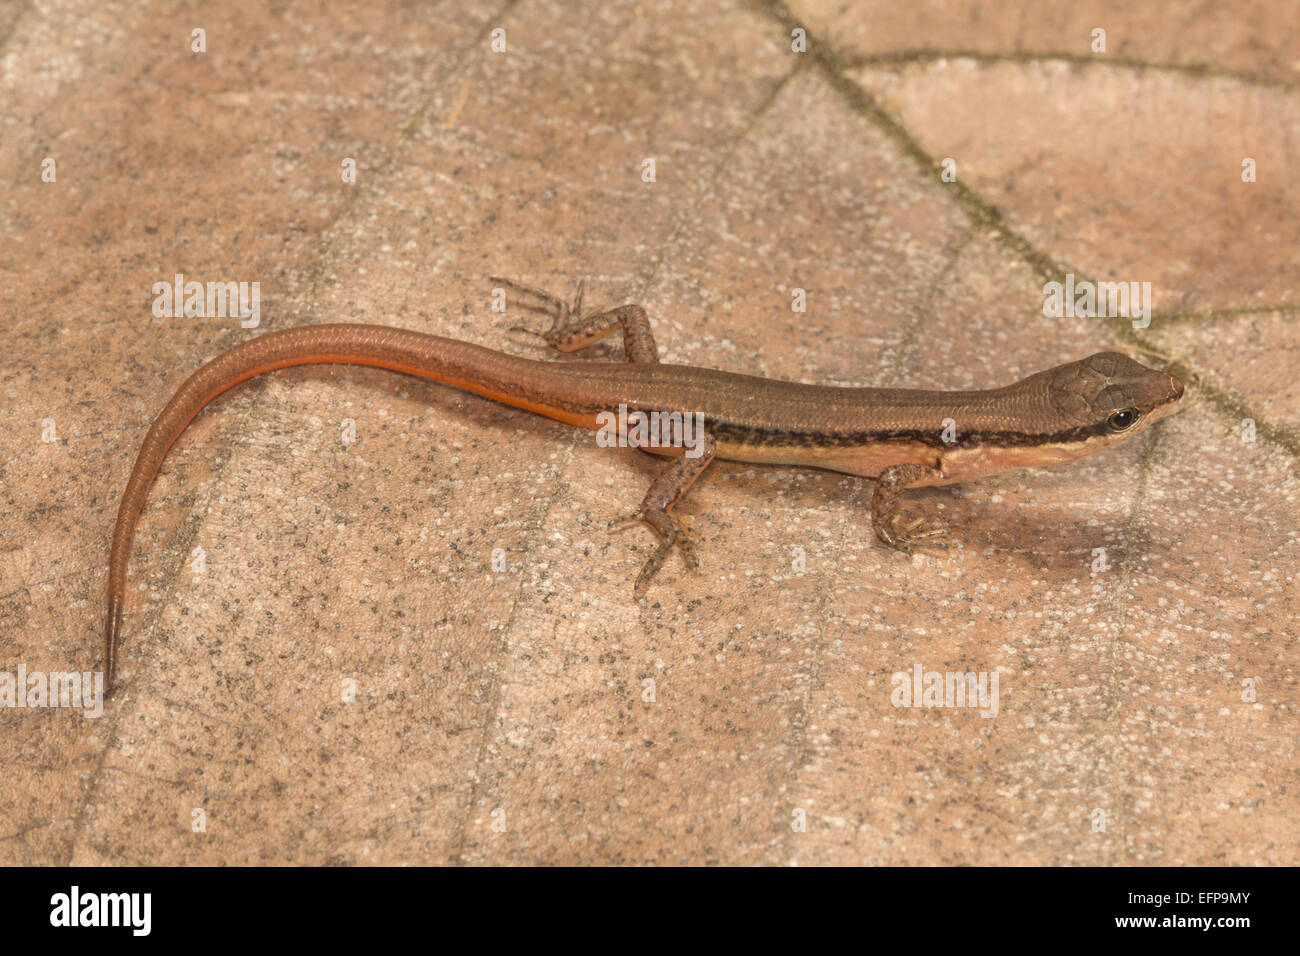 Scincidae, Sphenomorphus sp., Trishna WLS, Tripura Slender lizard that lives among leaf litter and feeds on small insects. Stock Photo